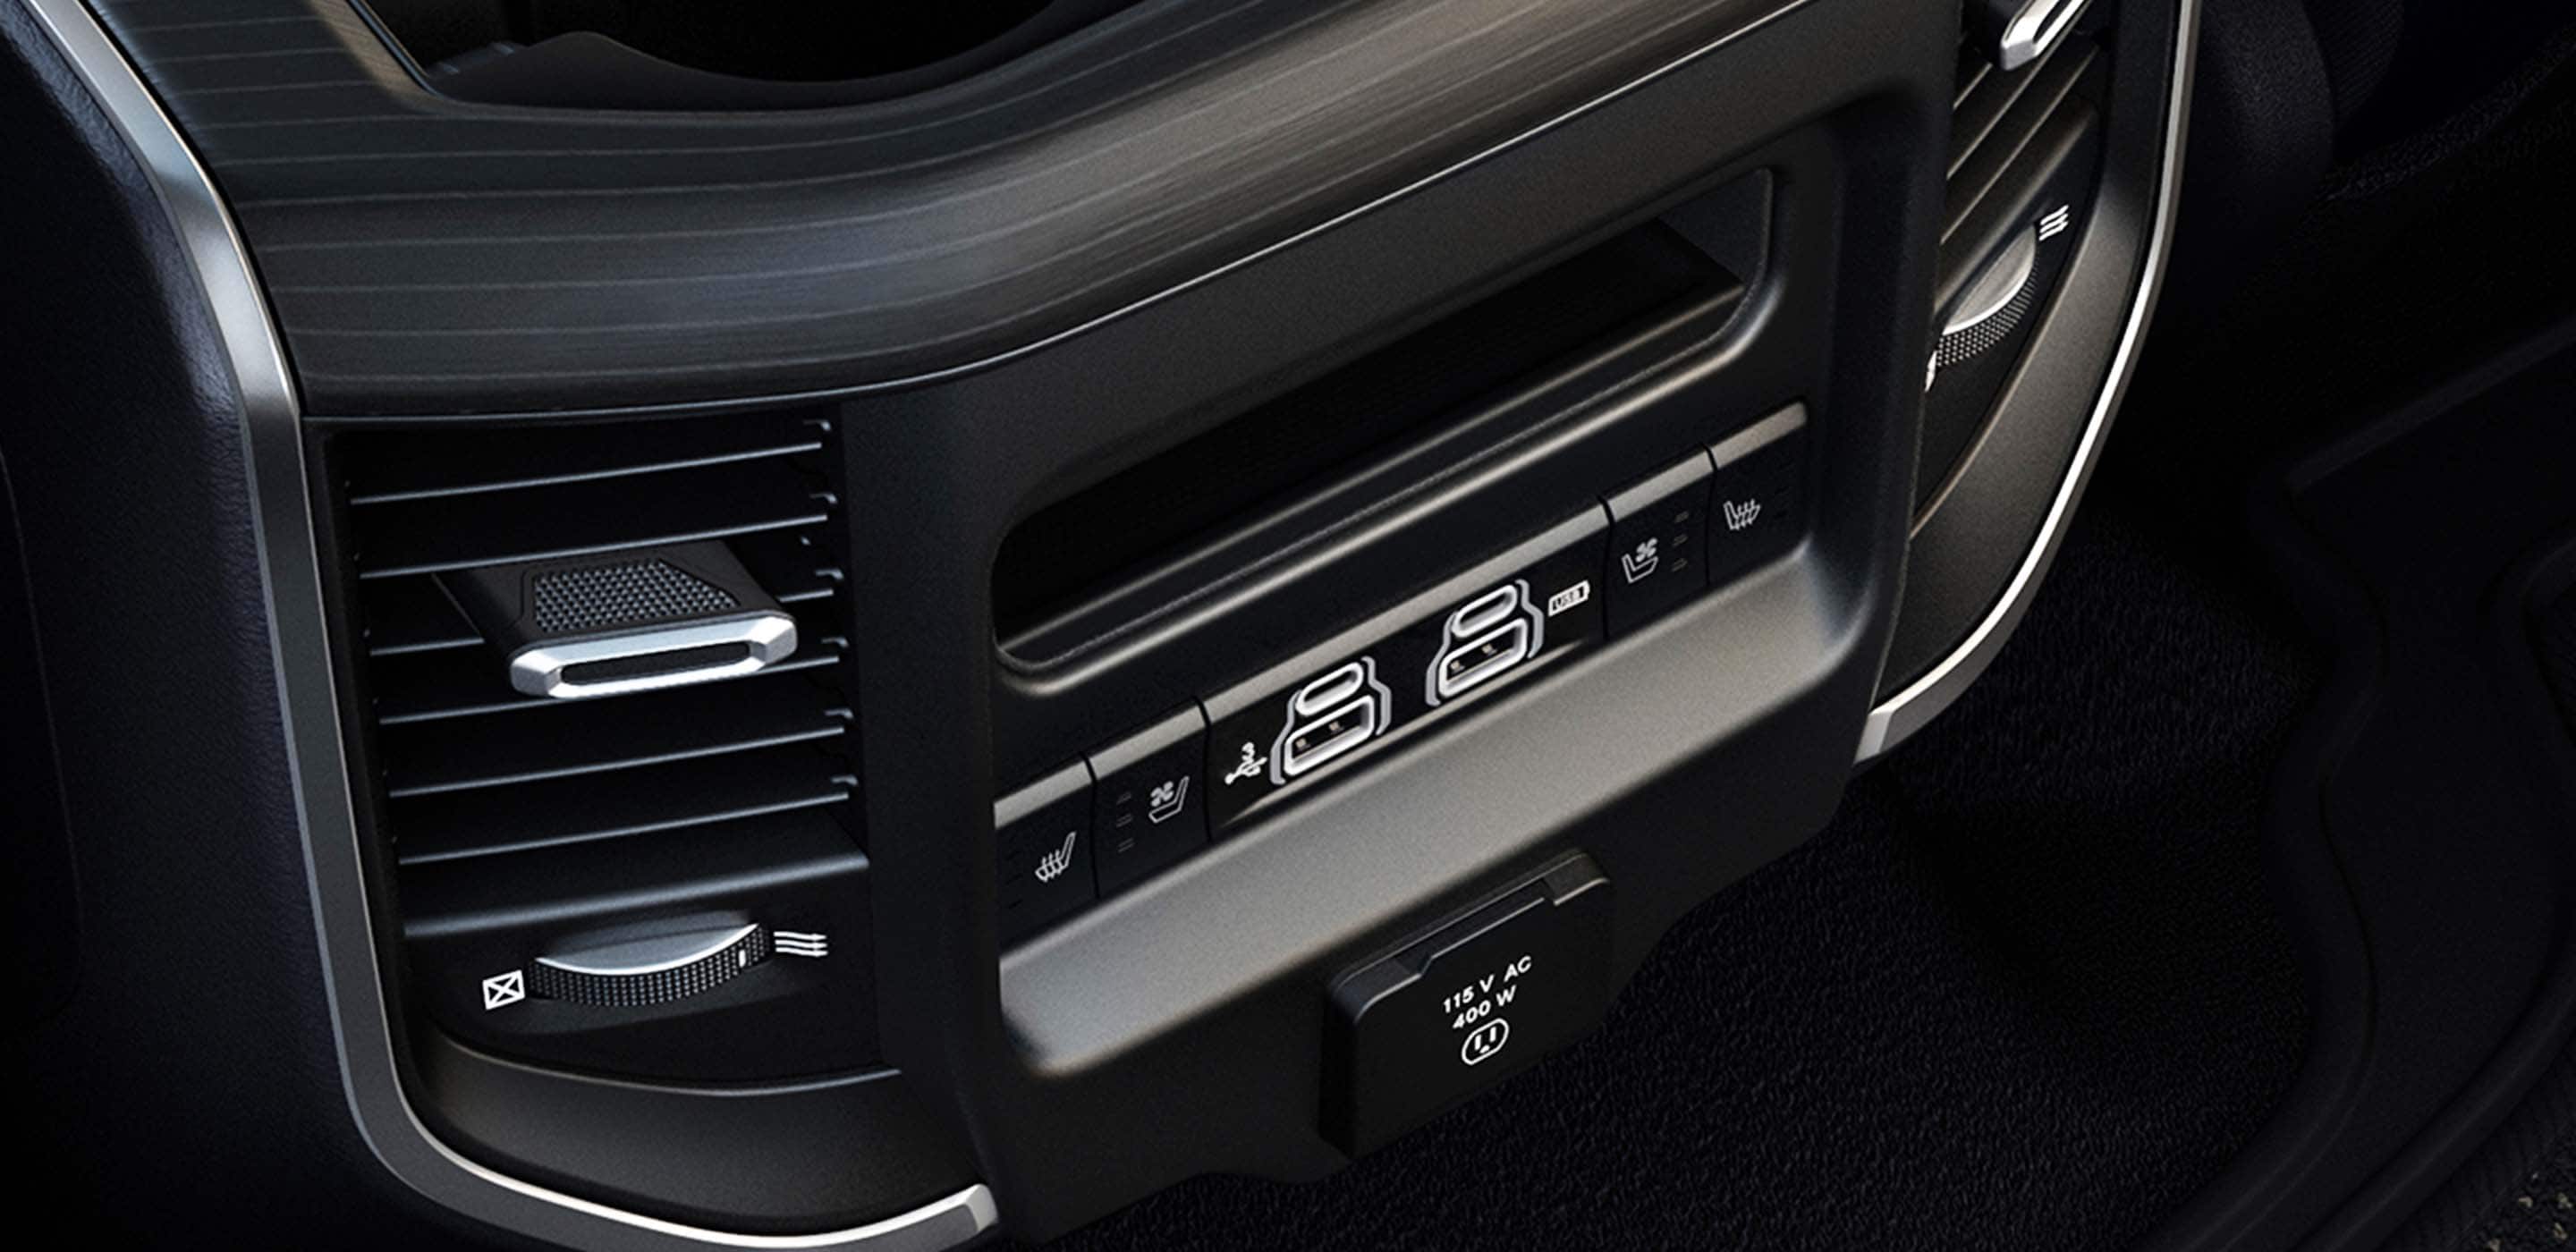 Technology In The All-New 2019 RAM 1500